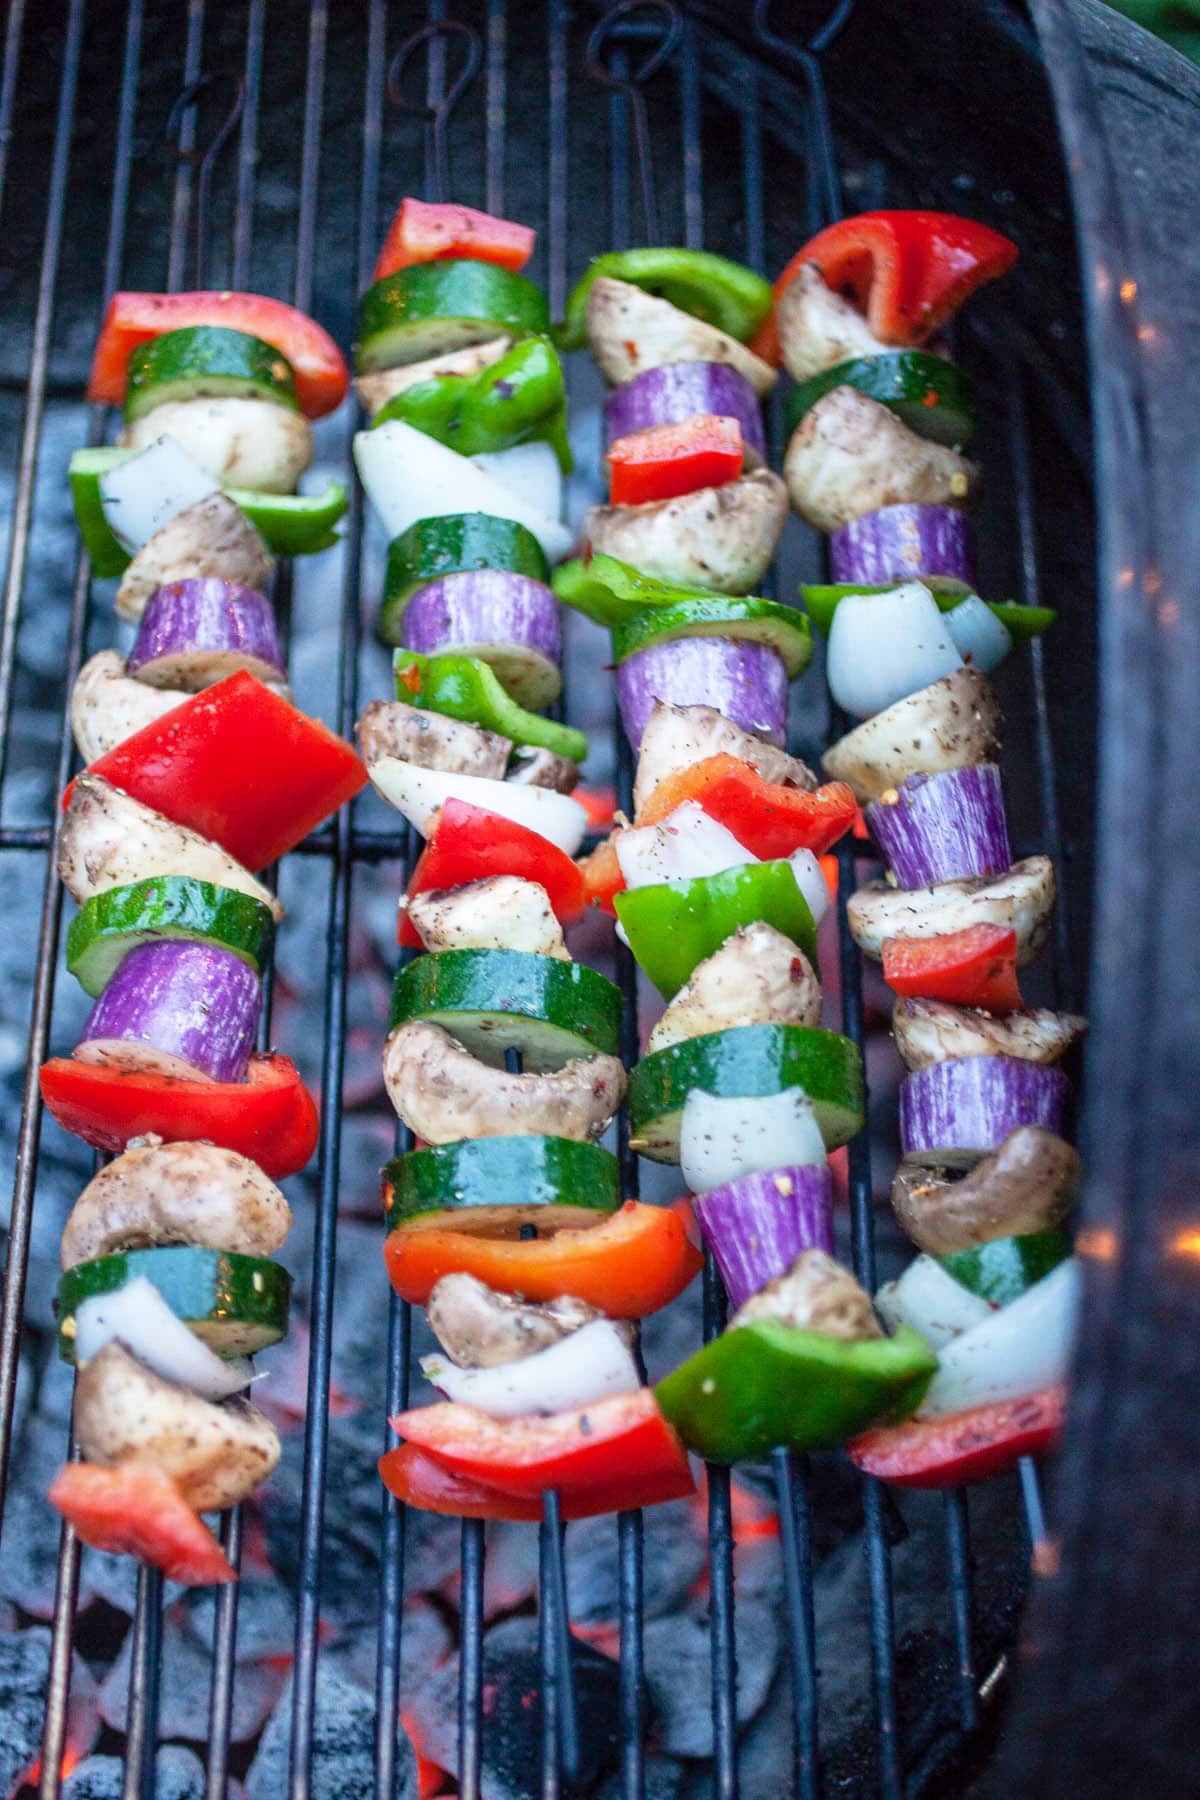 Vegetable skewers cooked on Weber grill.